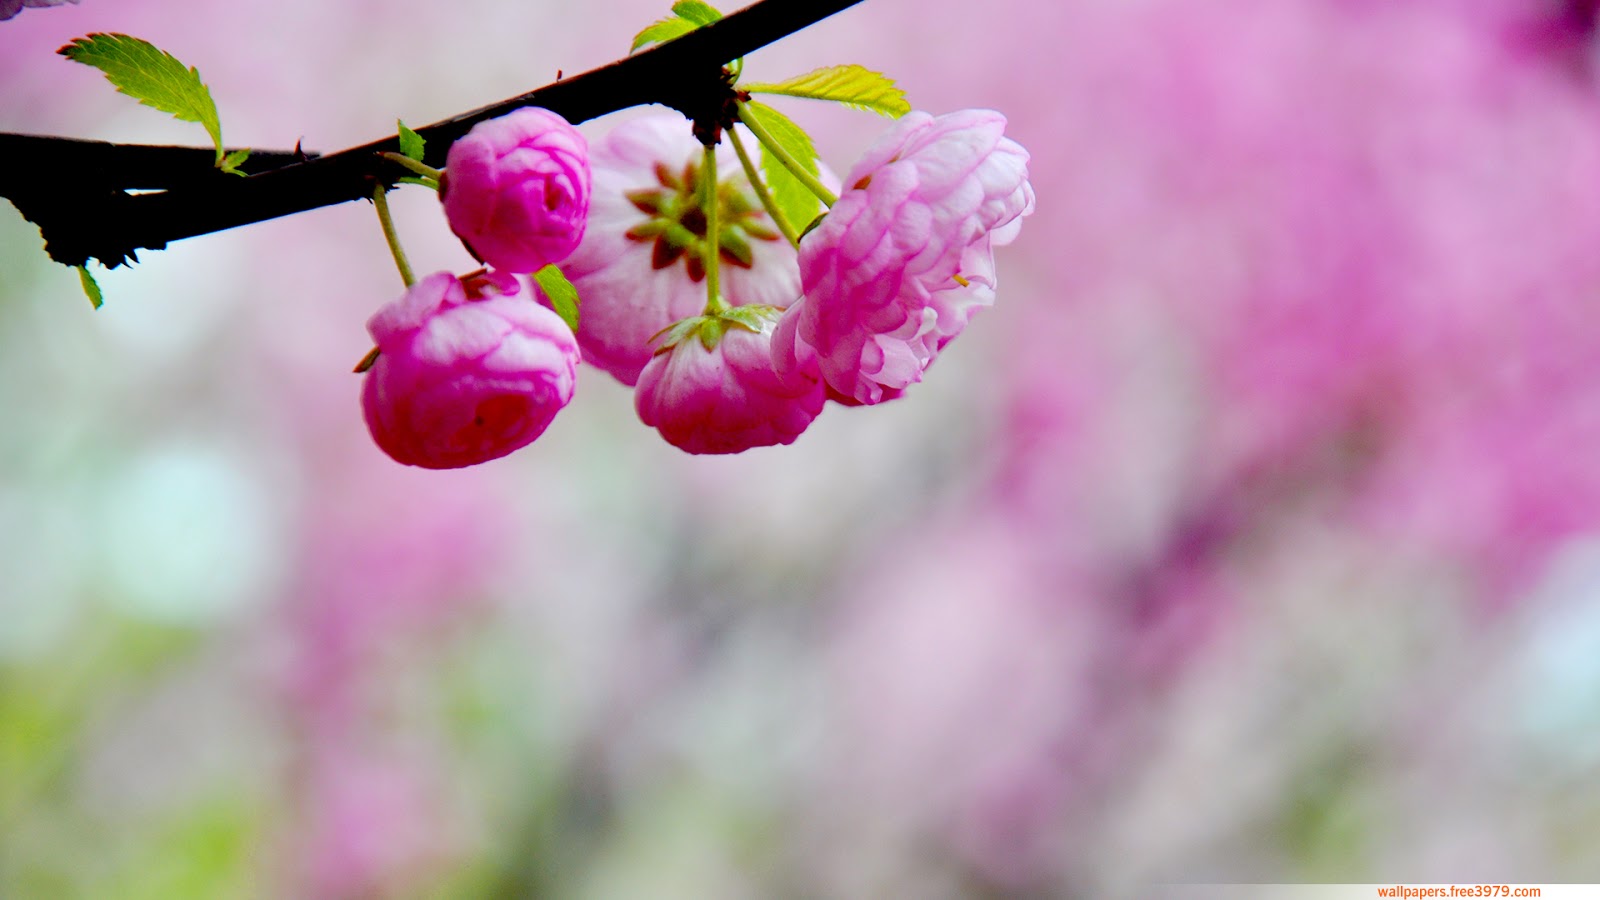 Pink Peach Blossom free wallpaper download Wallpapers Wallpaper Free